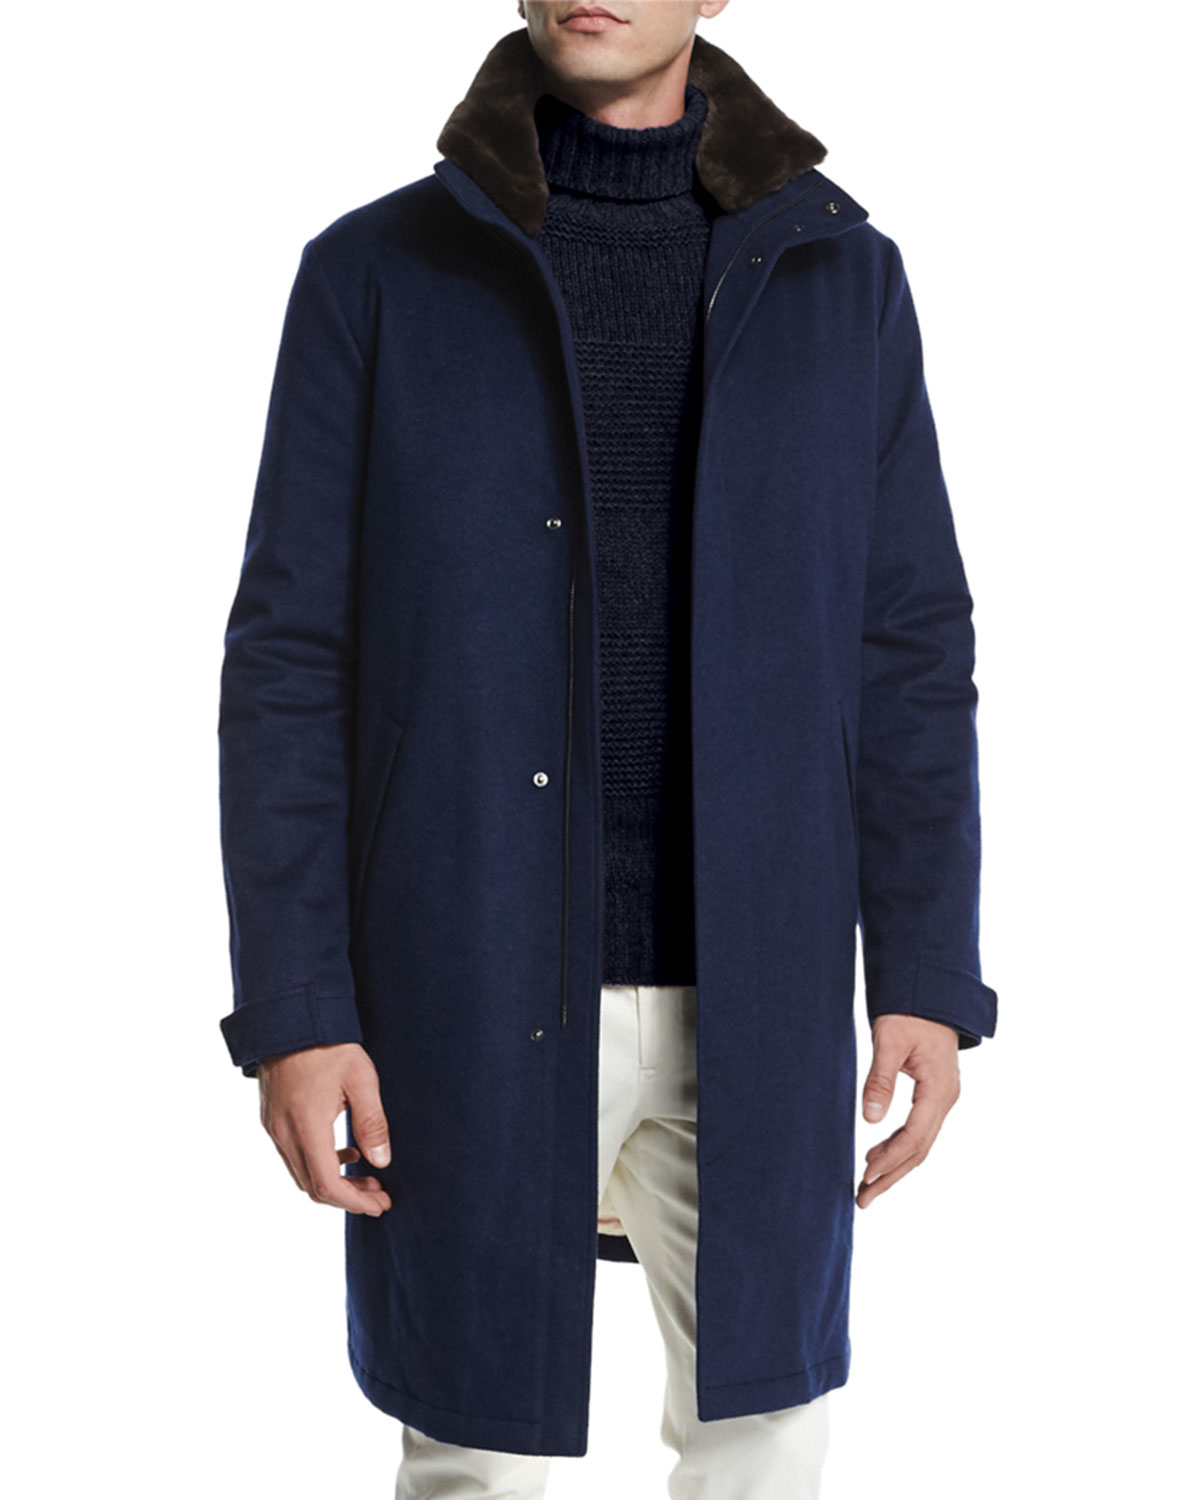 Lyst - Loro Piana Icer Cashmere Coat With Fur-trimmed Collar in Blue